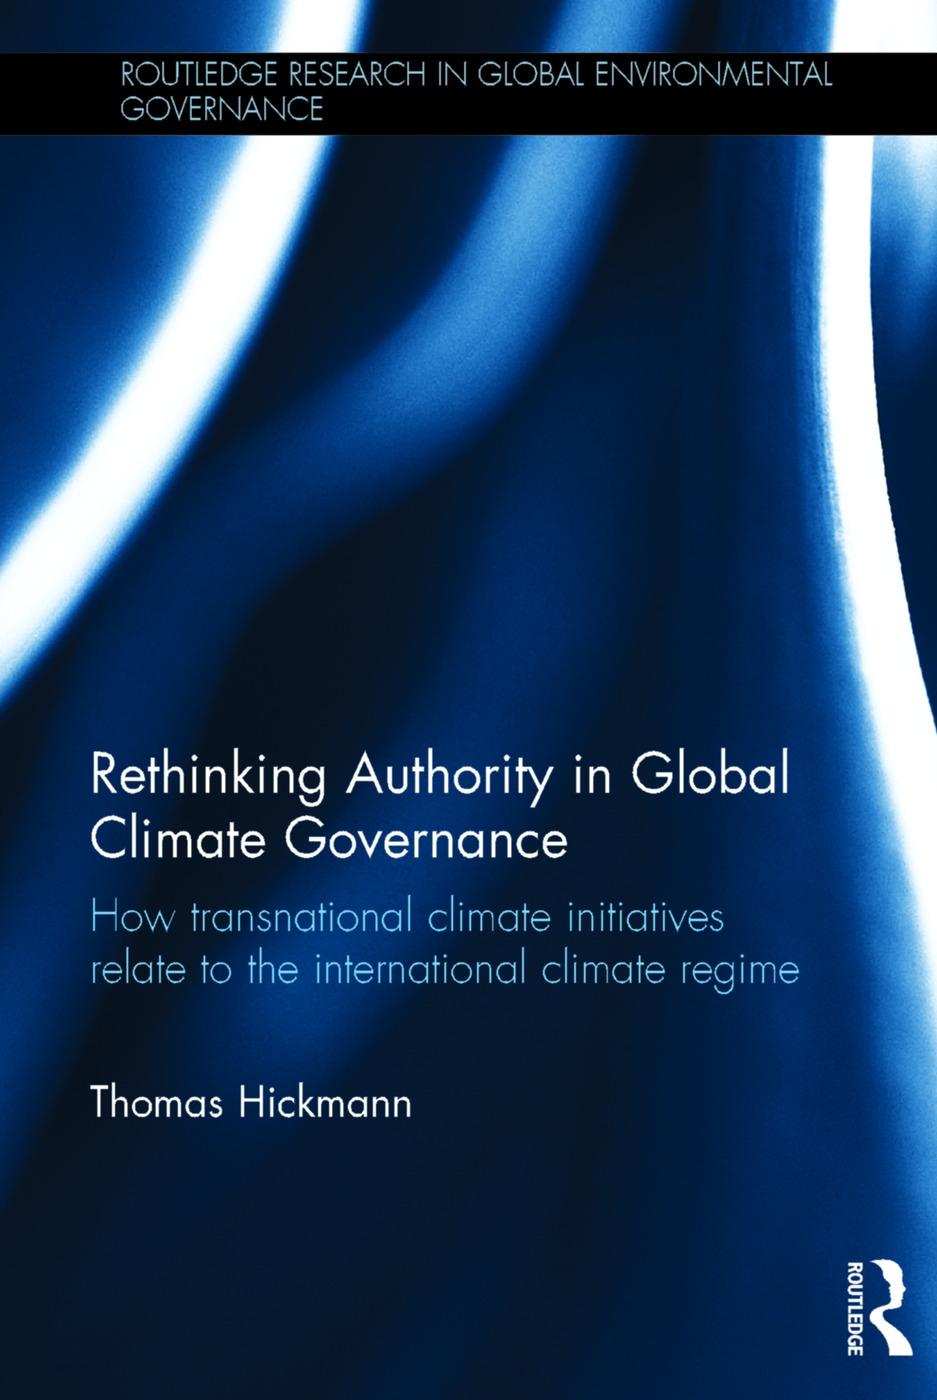 Rethinking Authority in Global Climate Governance: How Transnational Climate Initiatives Relate to the International Climate Regime